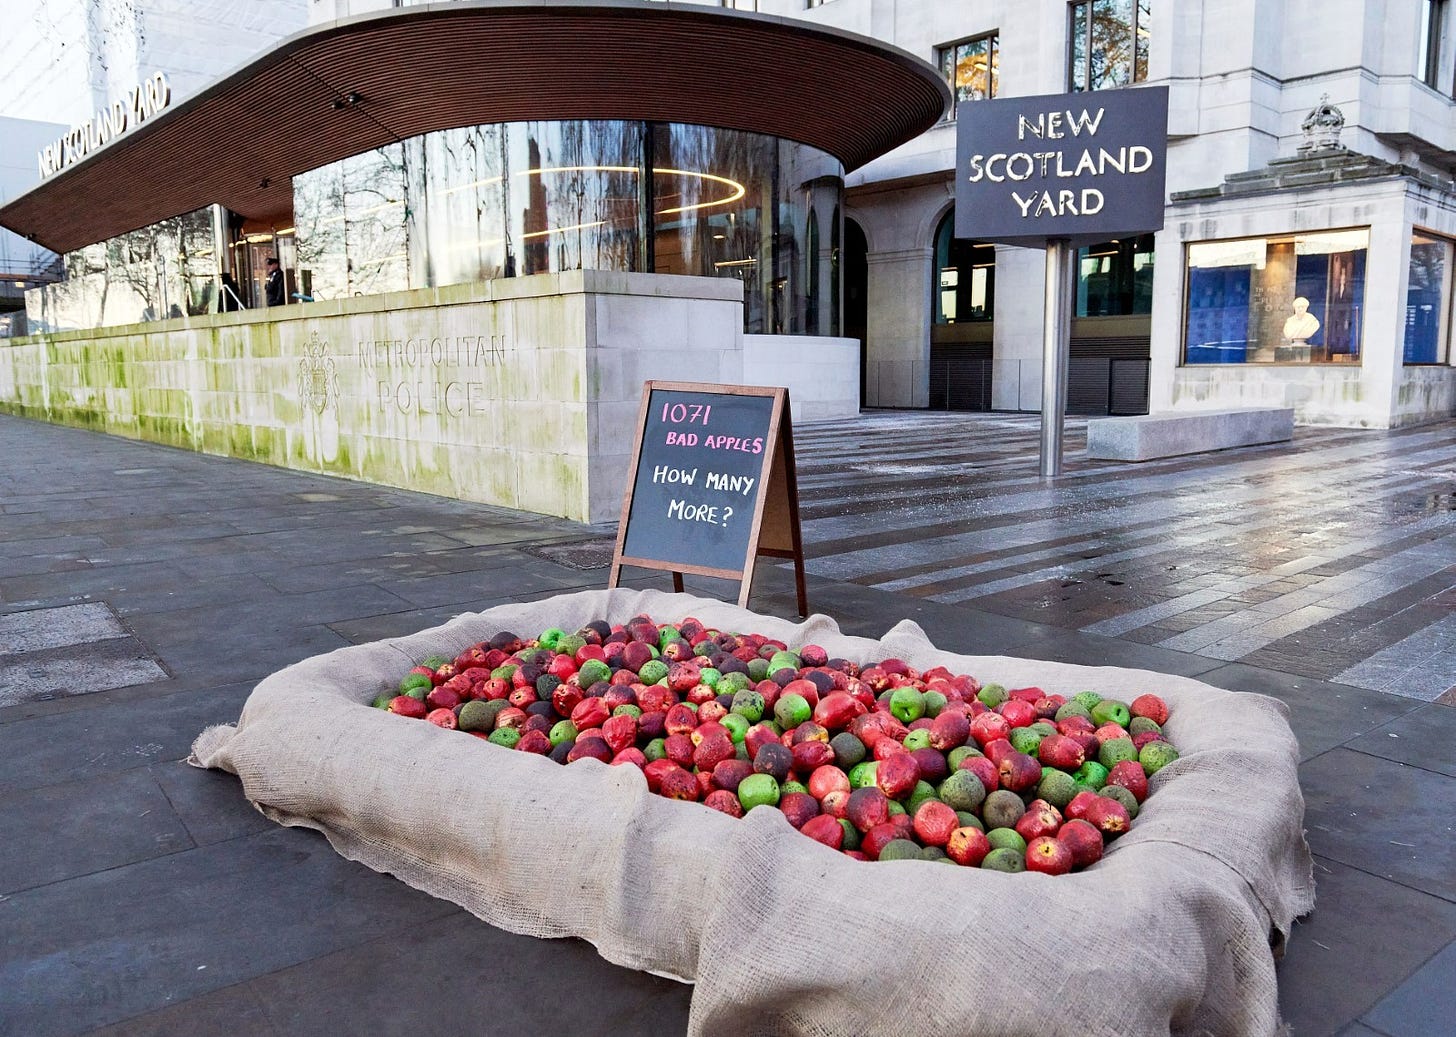 Refuge places 1,071 rotten apples outside New Scotland Yard and asks, 'How  many more bad apples?' – Refuge